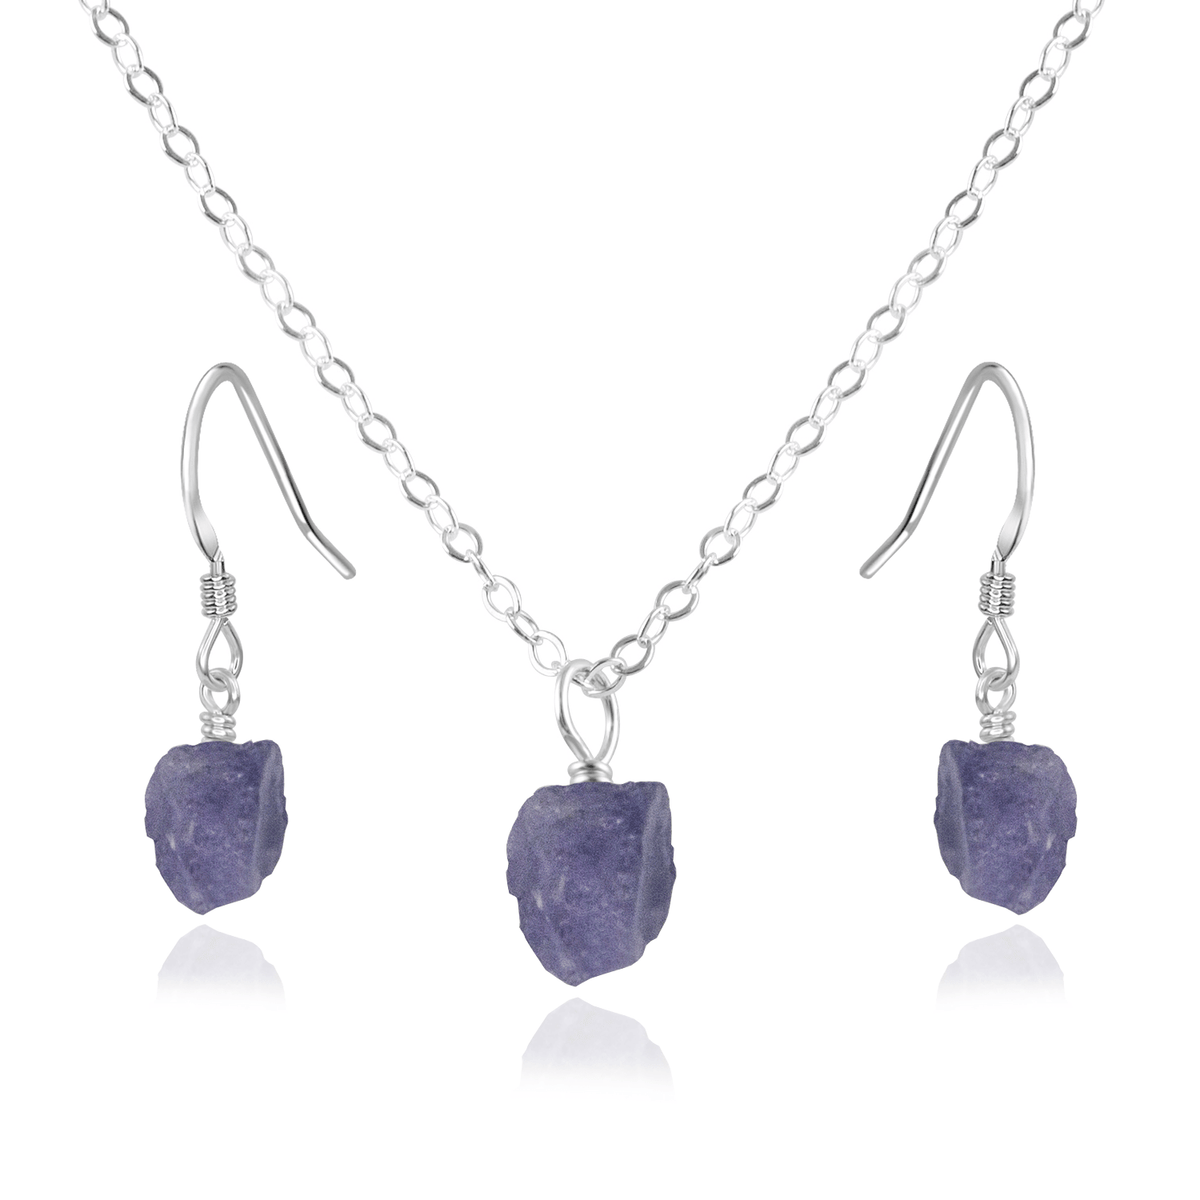 Raw Tanzanite Crystal Earrings & Necklace Set - Raw Tanzanite Crystal Earrings & Necklace Set - Sterling Silver / Cable - Luna Tide Handmade Crystal Jewellery